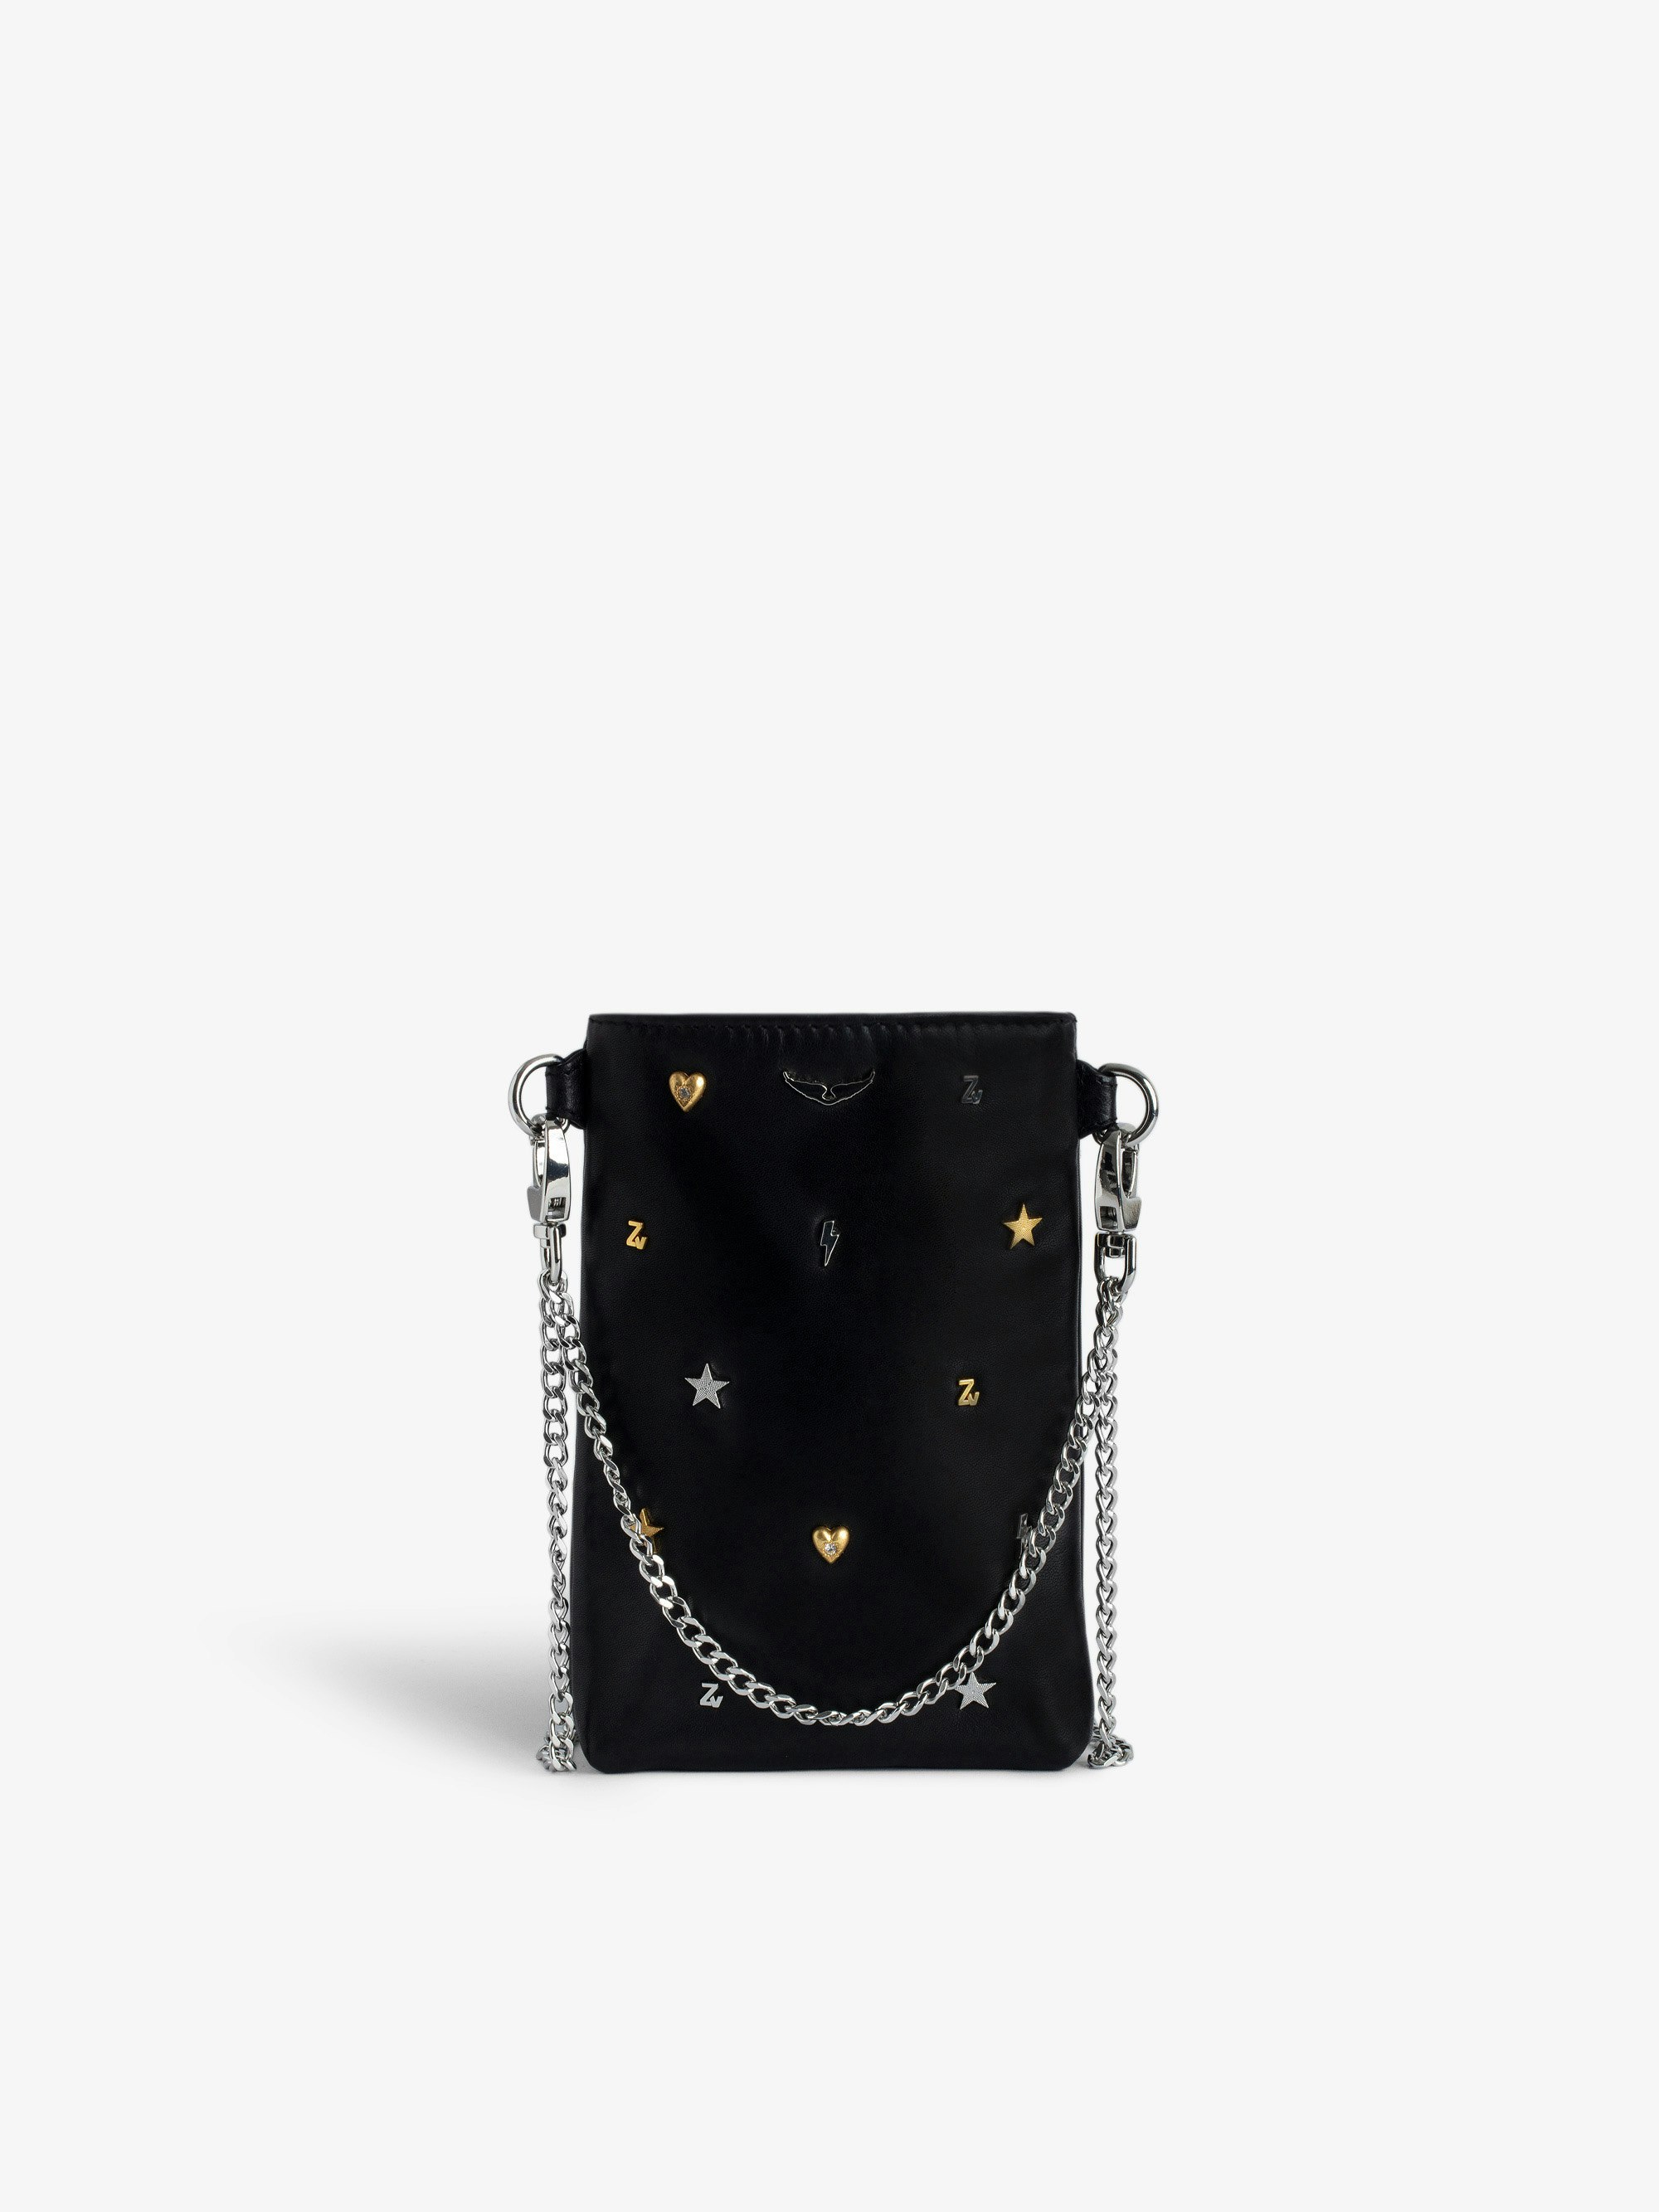 Rock Lucky Charms Pouch Clutch - Women’s black grained leather phone pouch with studs and wings charm.